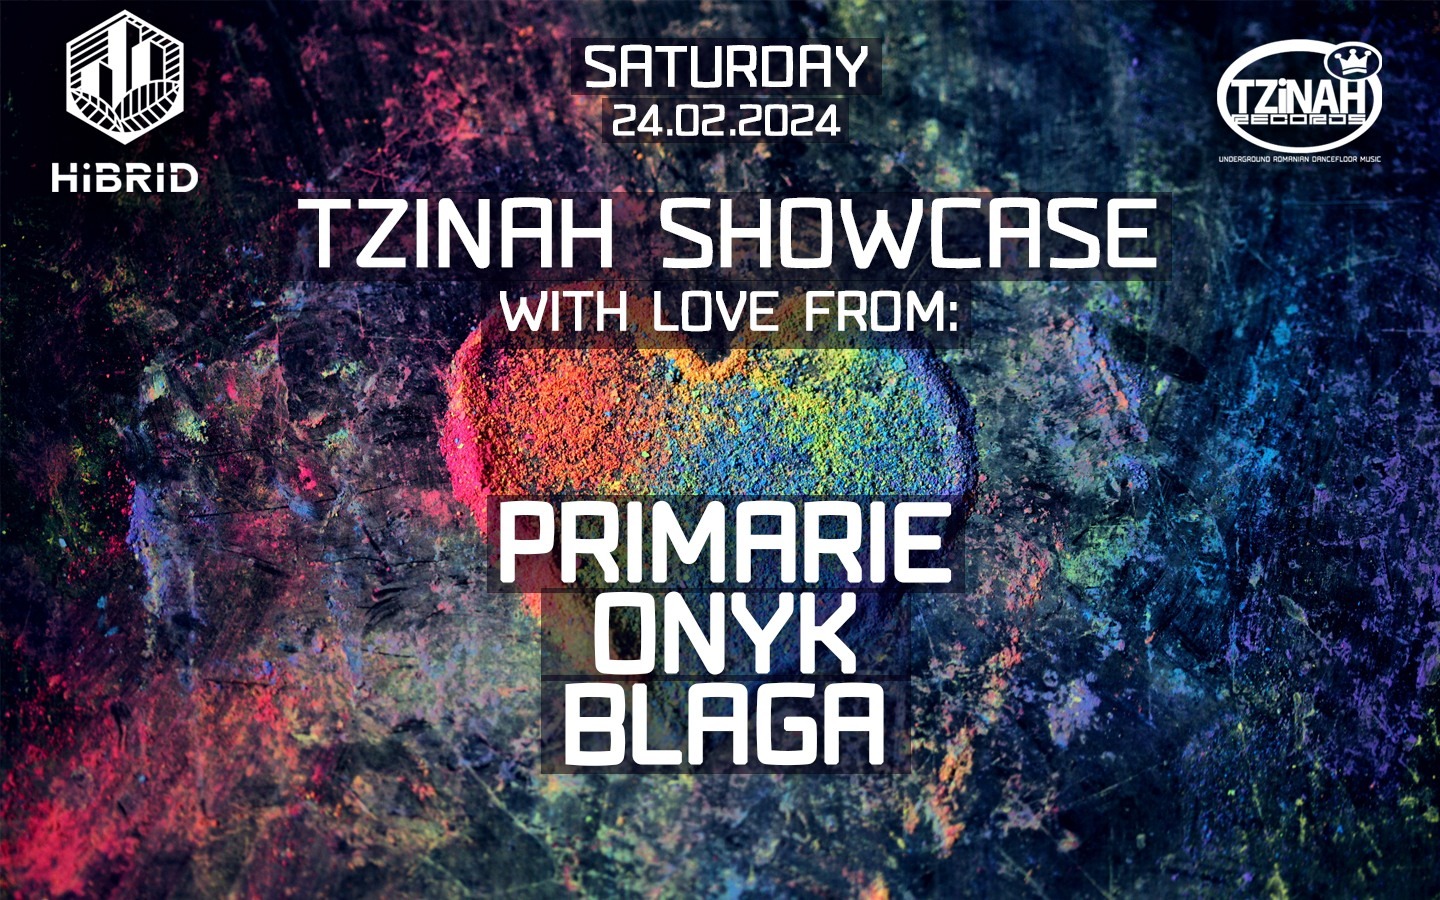 Tzinah Showcase with Love from Primarie, Onyk, Blaga